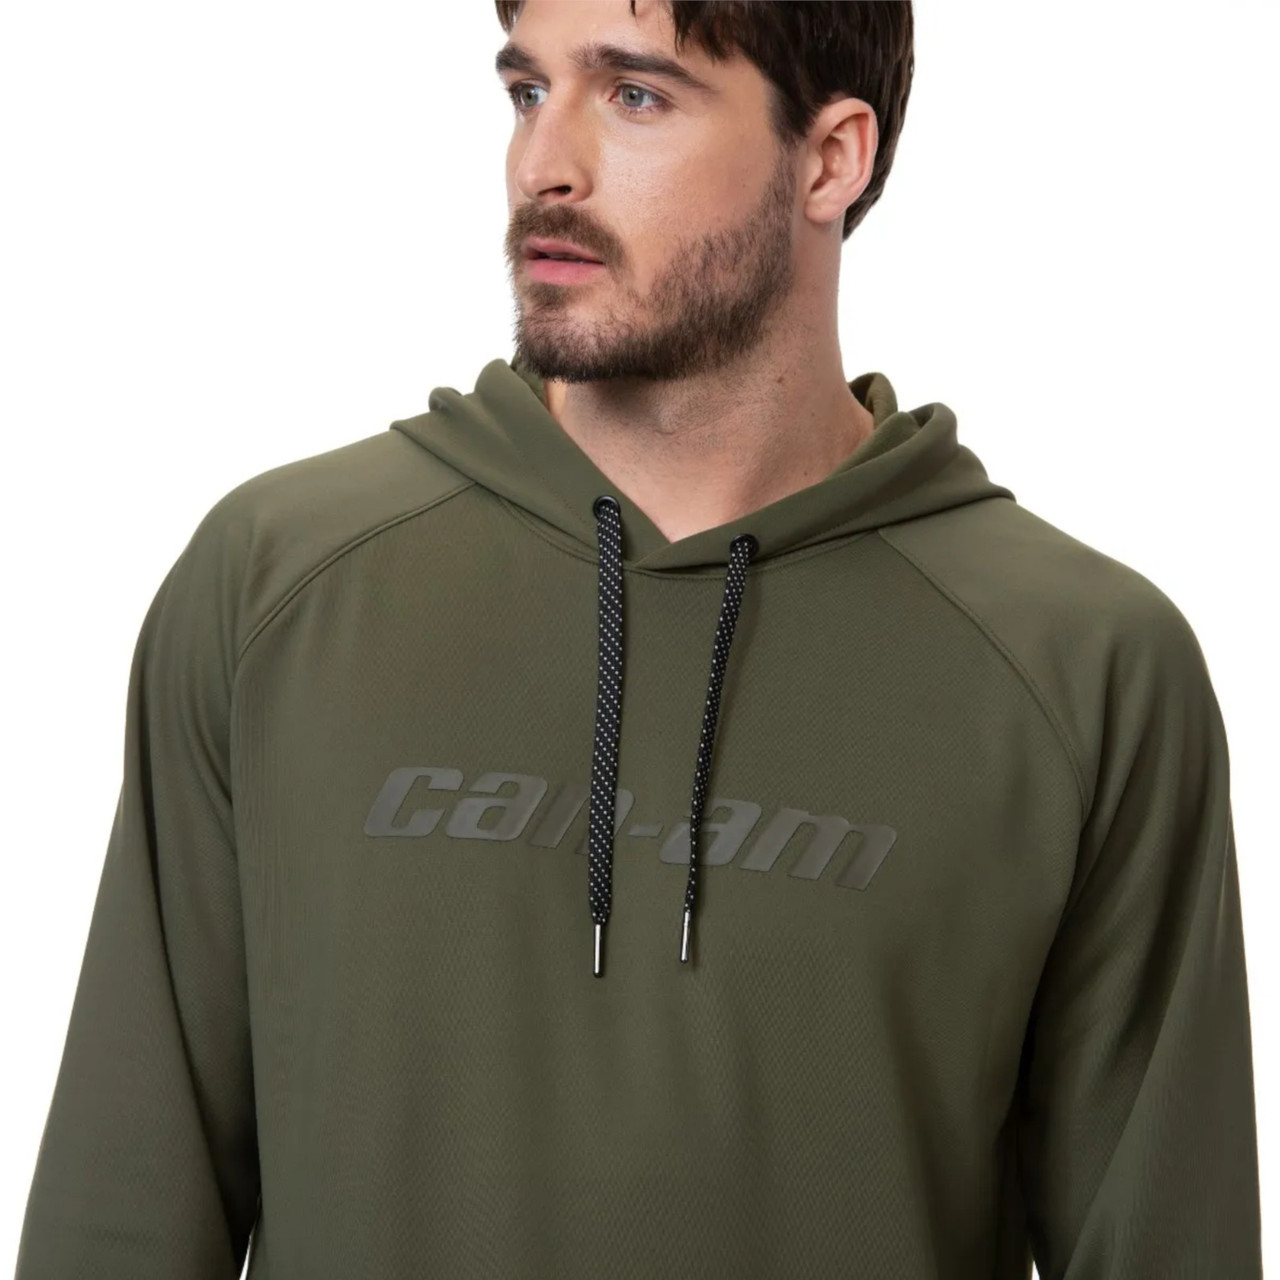 Can-Am New OEM, Men's Large Performance Soft Fleece Hoodie, 4546270977